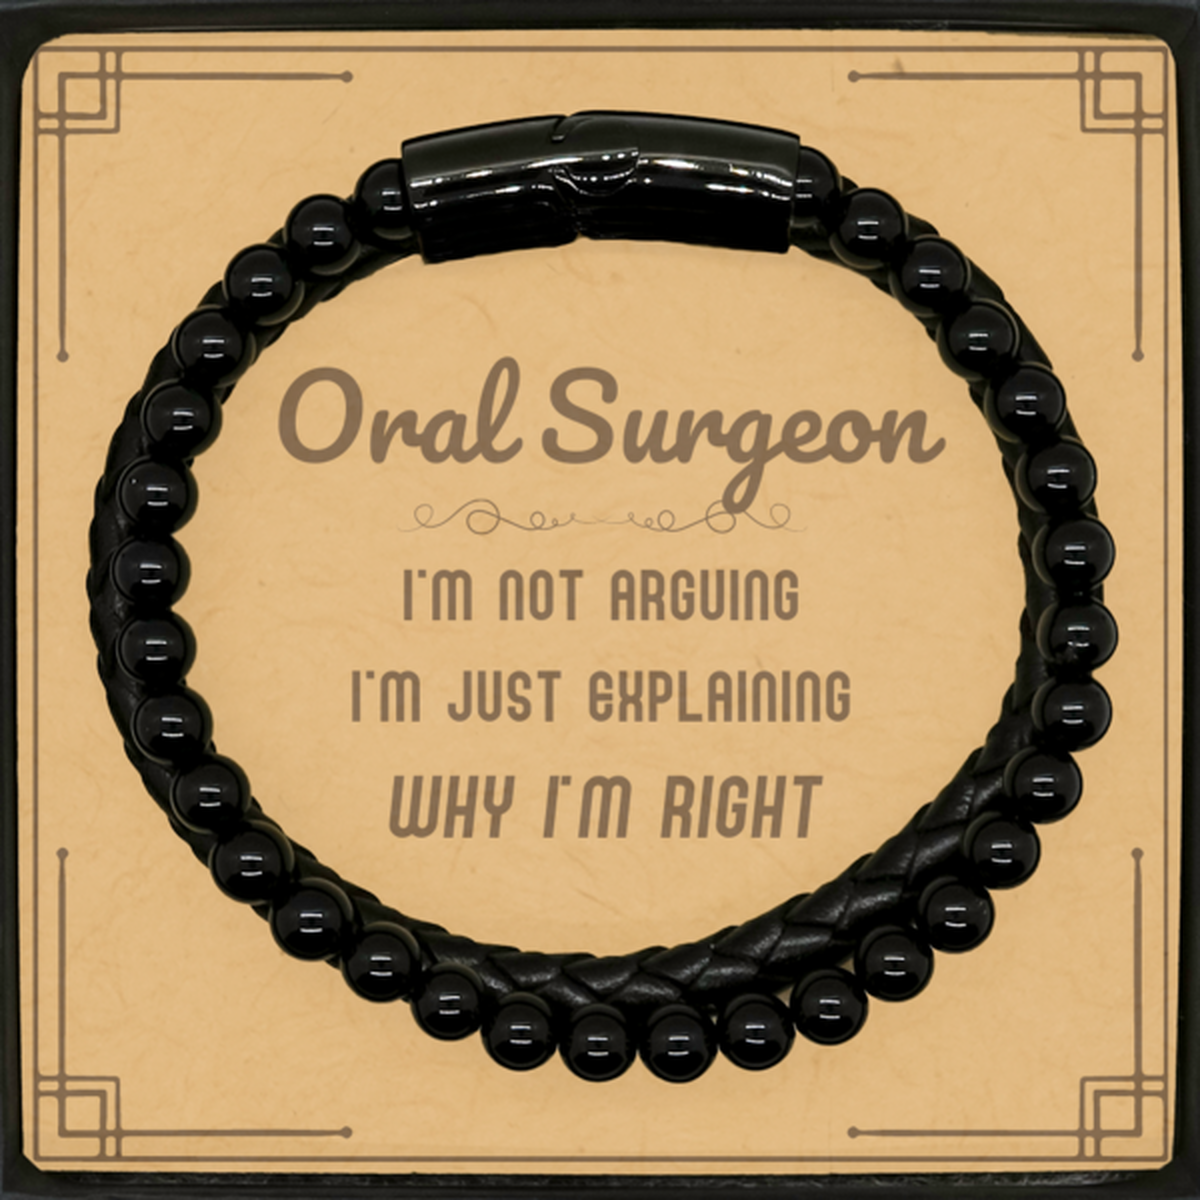 Oral Surgeon I'm not Arguing. I'm Just Explaining Why I'm RIGHT Stone Leather Bracelets, Funny Saying Quote Oral Surgeon Gifts For Oral Surgeon Message Card Graduation Birthday Christmas Gifts for Men Women Coworker